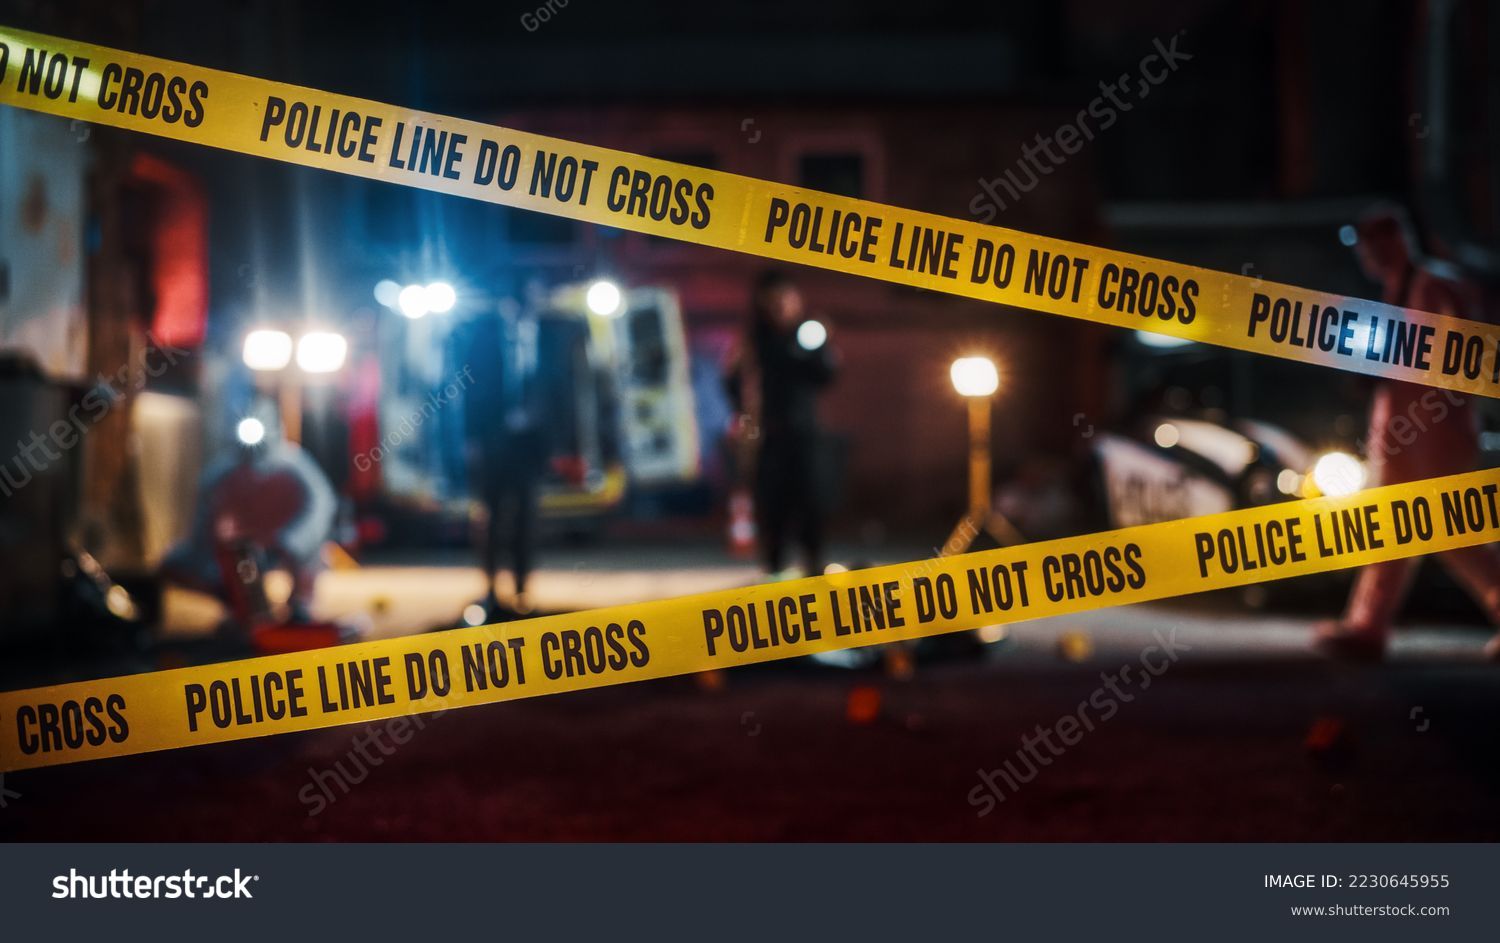 Crime Scene at Night: Crime Scene Investigation Team Working on a Murder. Female Police Officer Briefing Detective on the Victim's Body. Forensics and Paramedics Working. Cinematic Shot #2230645955